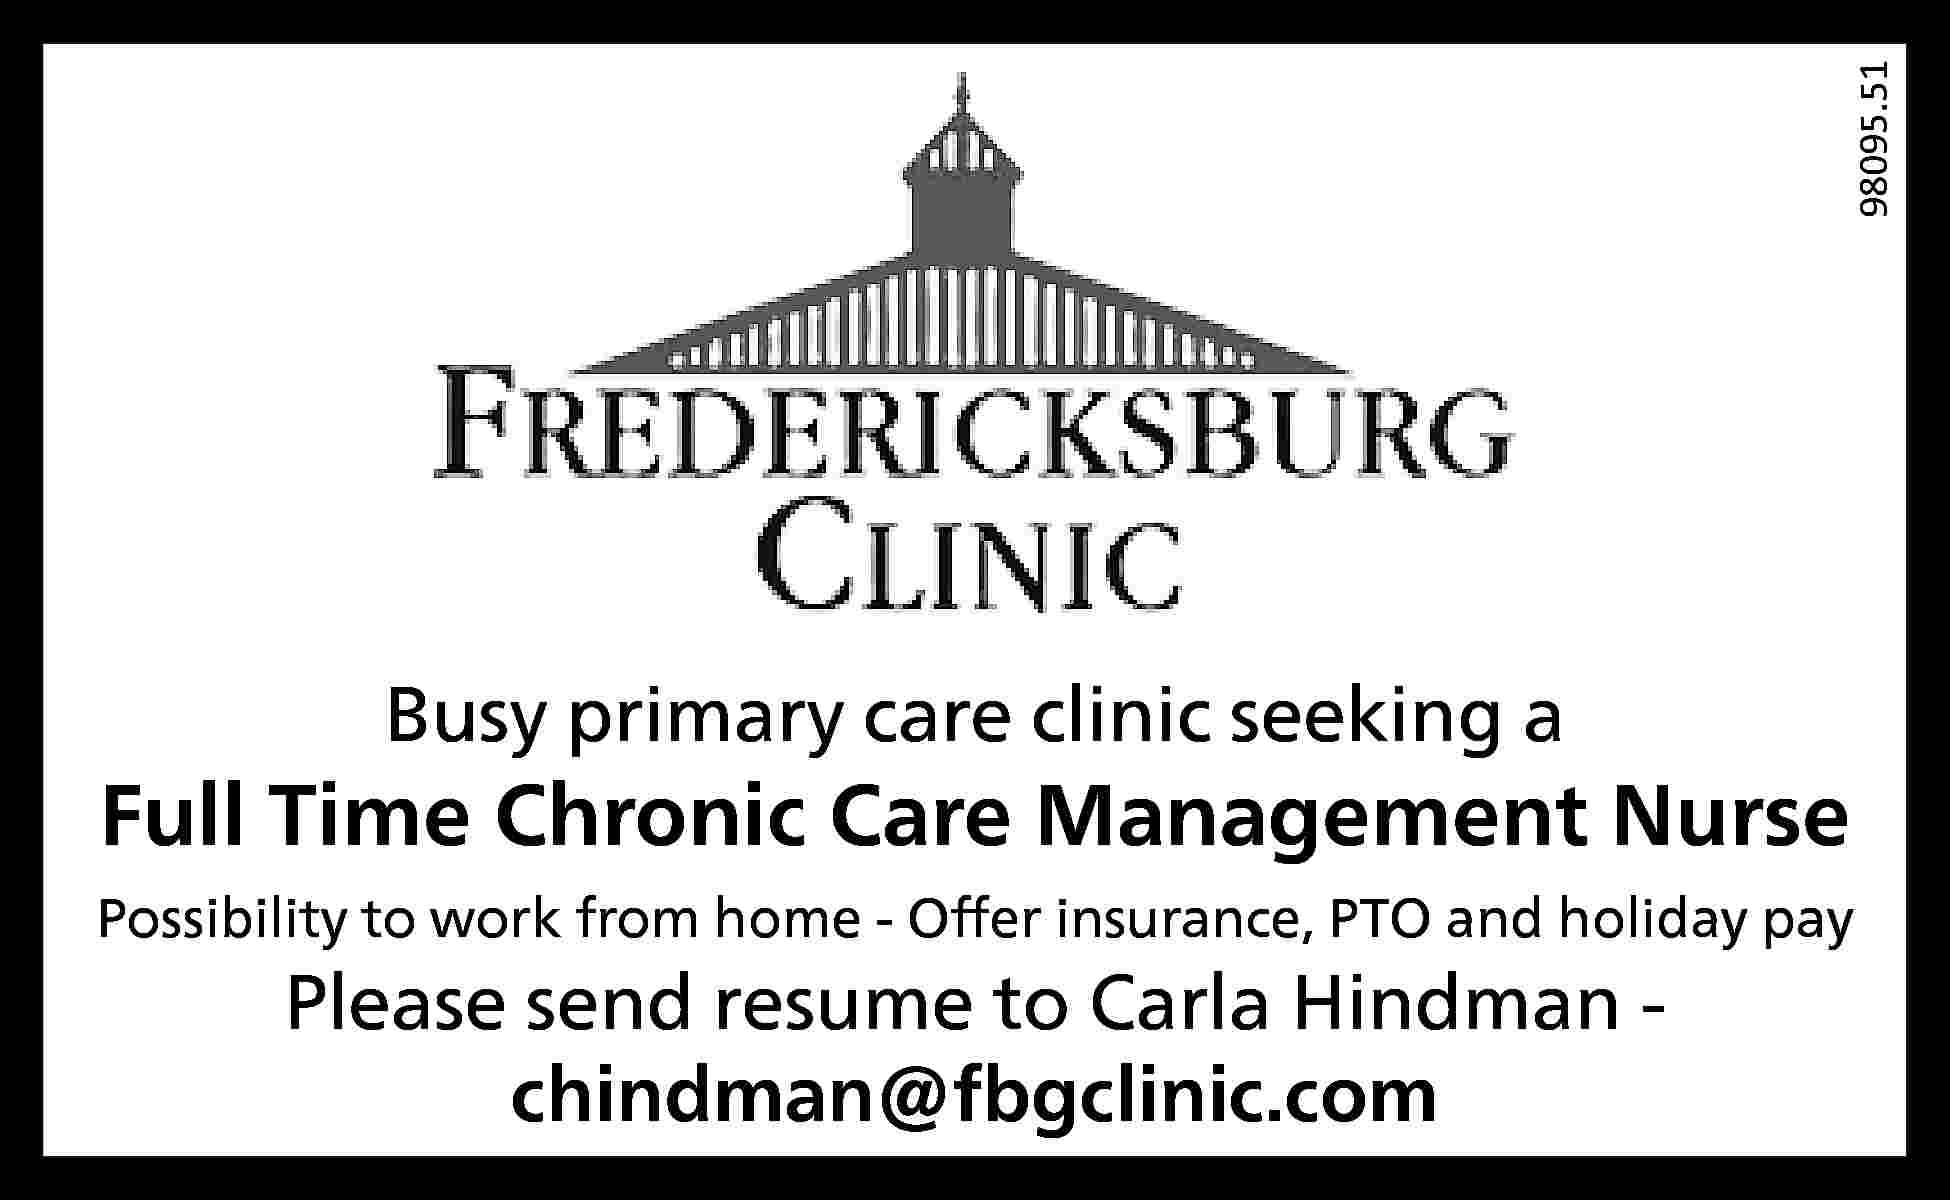 98095.51 Busy primary care clinic  98095.51 Busy primary care clinic seeking a Full Time Chronic Care Management Nurse Possibility to work from home - Offer insurance, PTO and holiday pay Please send resume to Carla Hindman chindman@fbgclinic.com